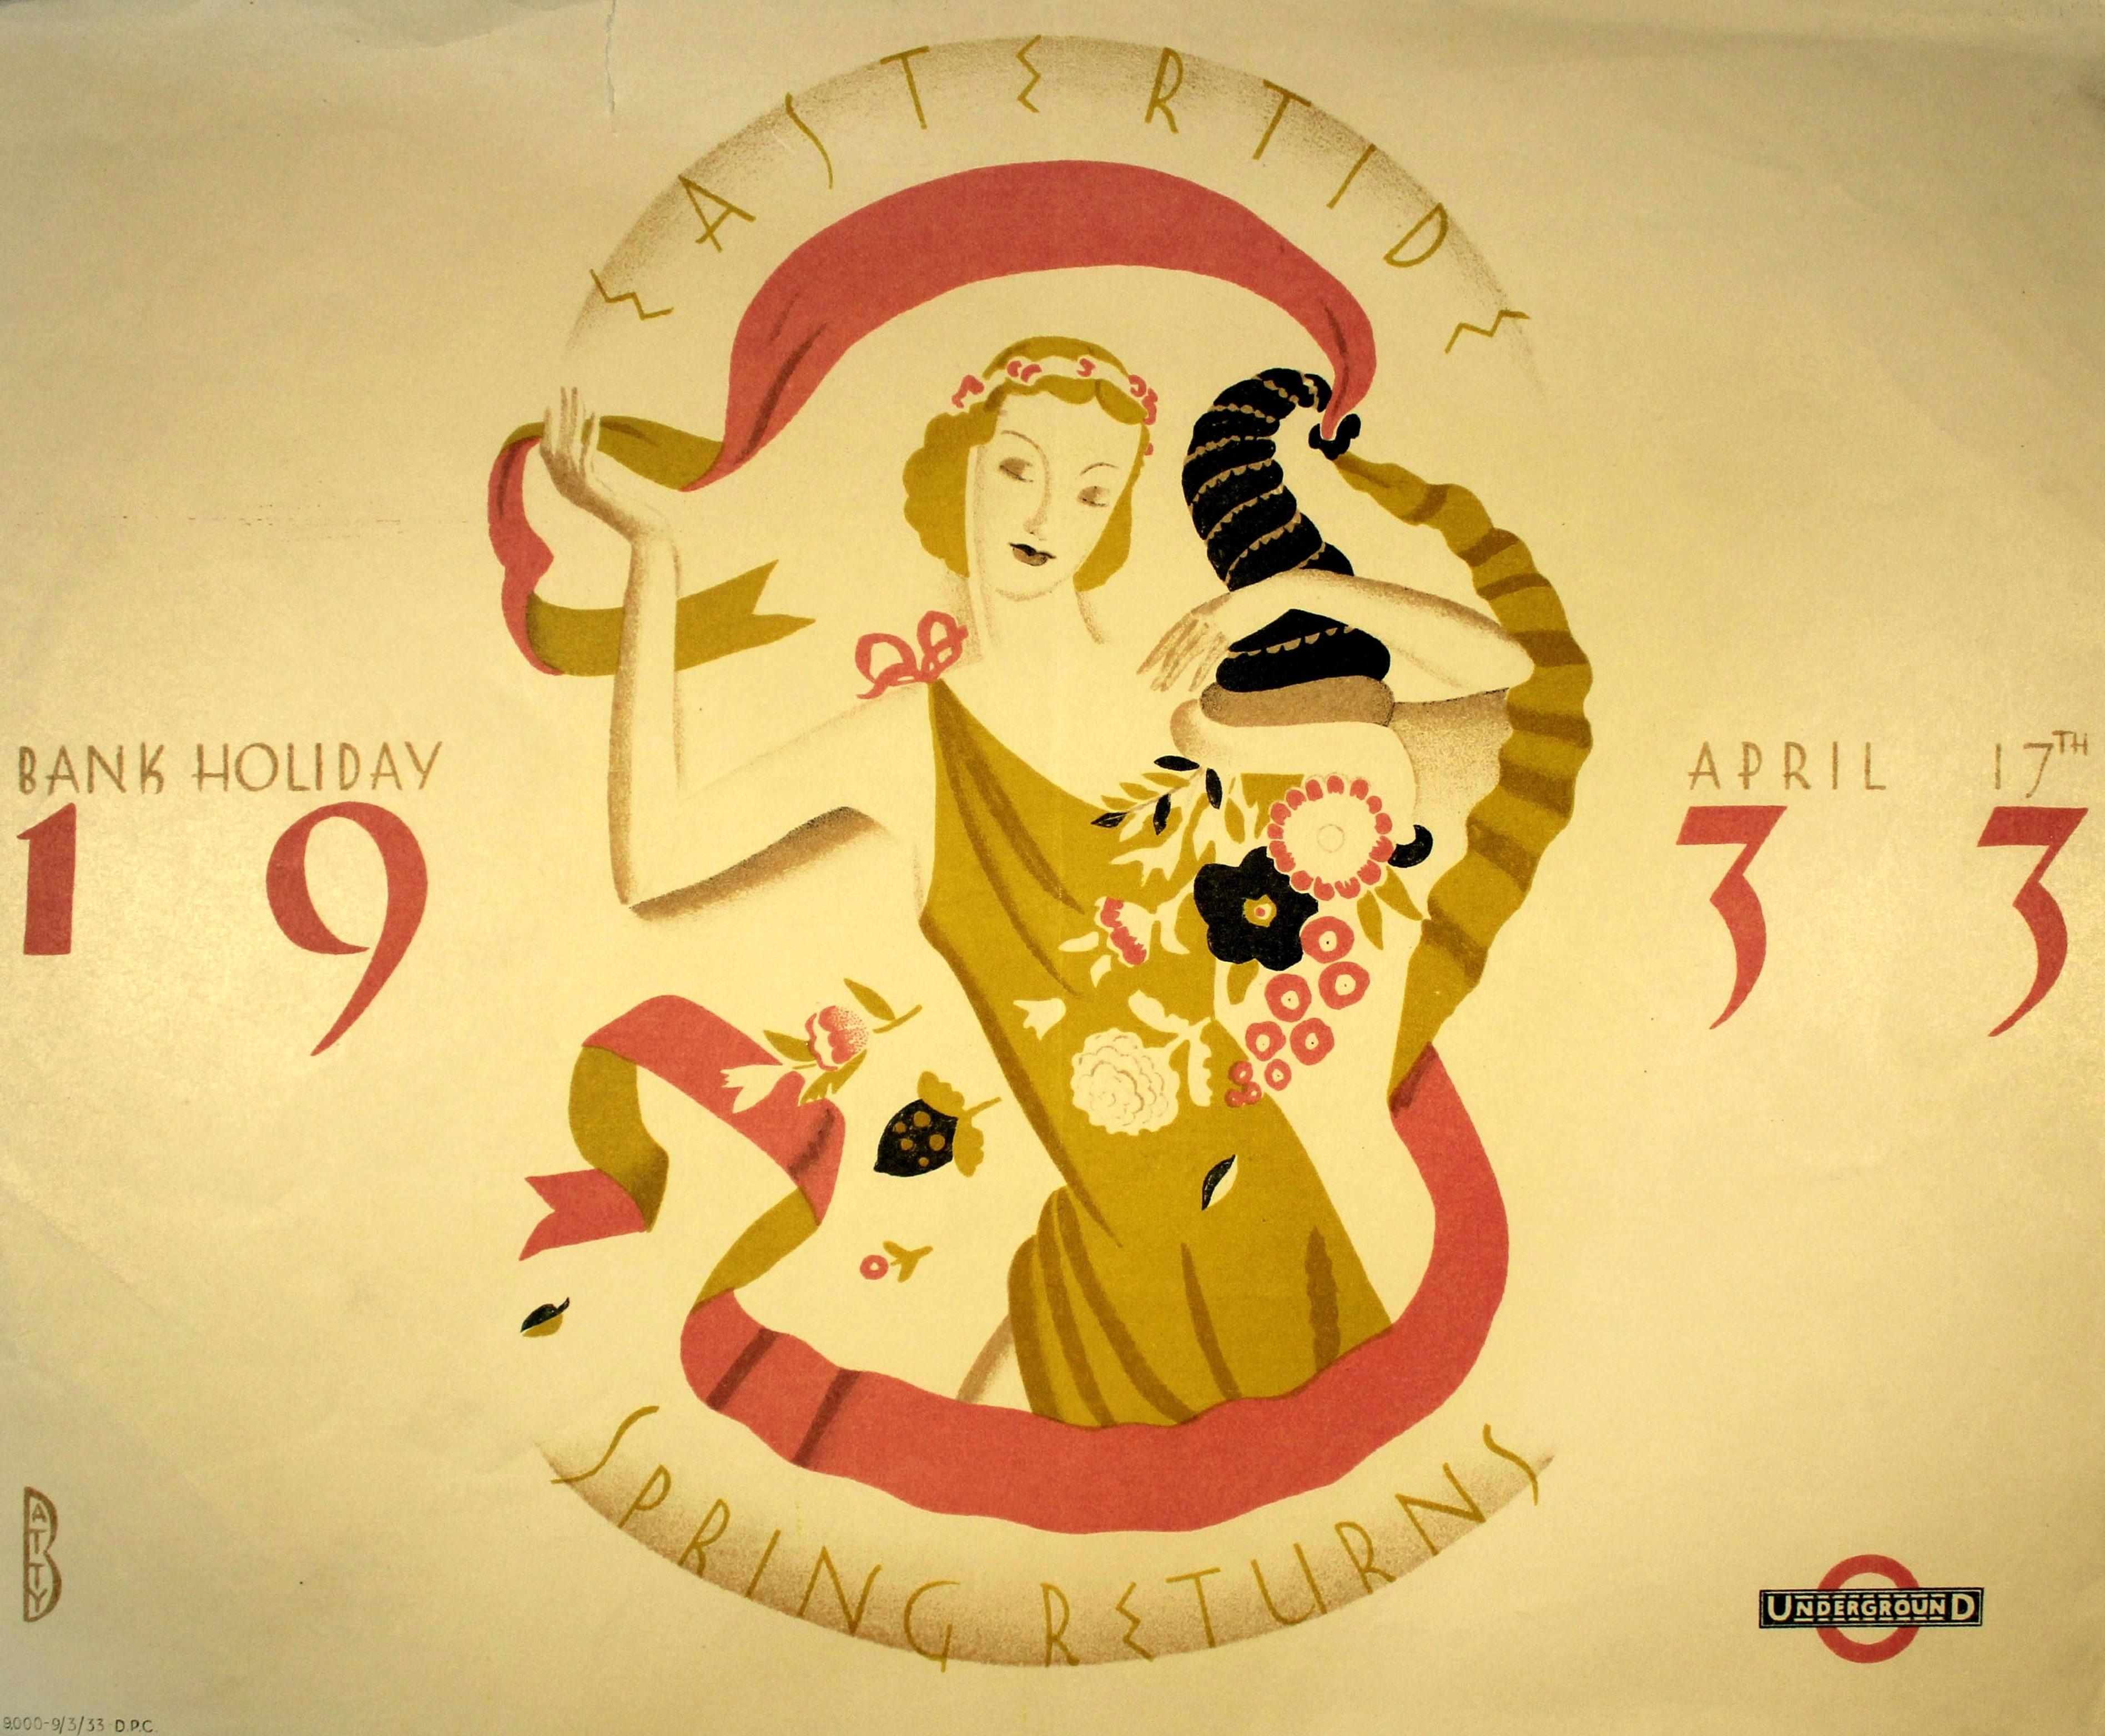 Original vintage London Transport poster - Eastertide Spring Returns Bank Holiday 17 April 1933 - featuring artwork by Dora Batty (1891-1966) depicting a lady holding a cornucopia of flowers framed by a pink and gold ribbon with the stylised